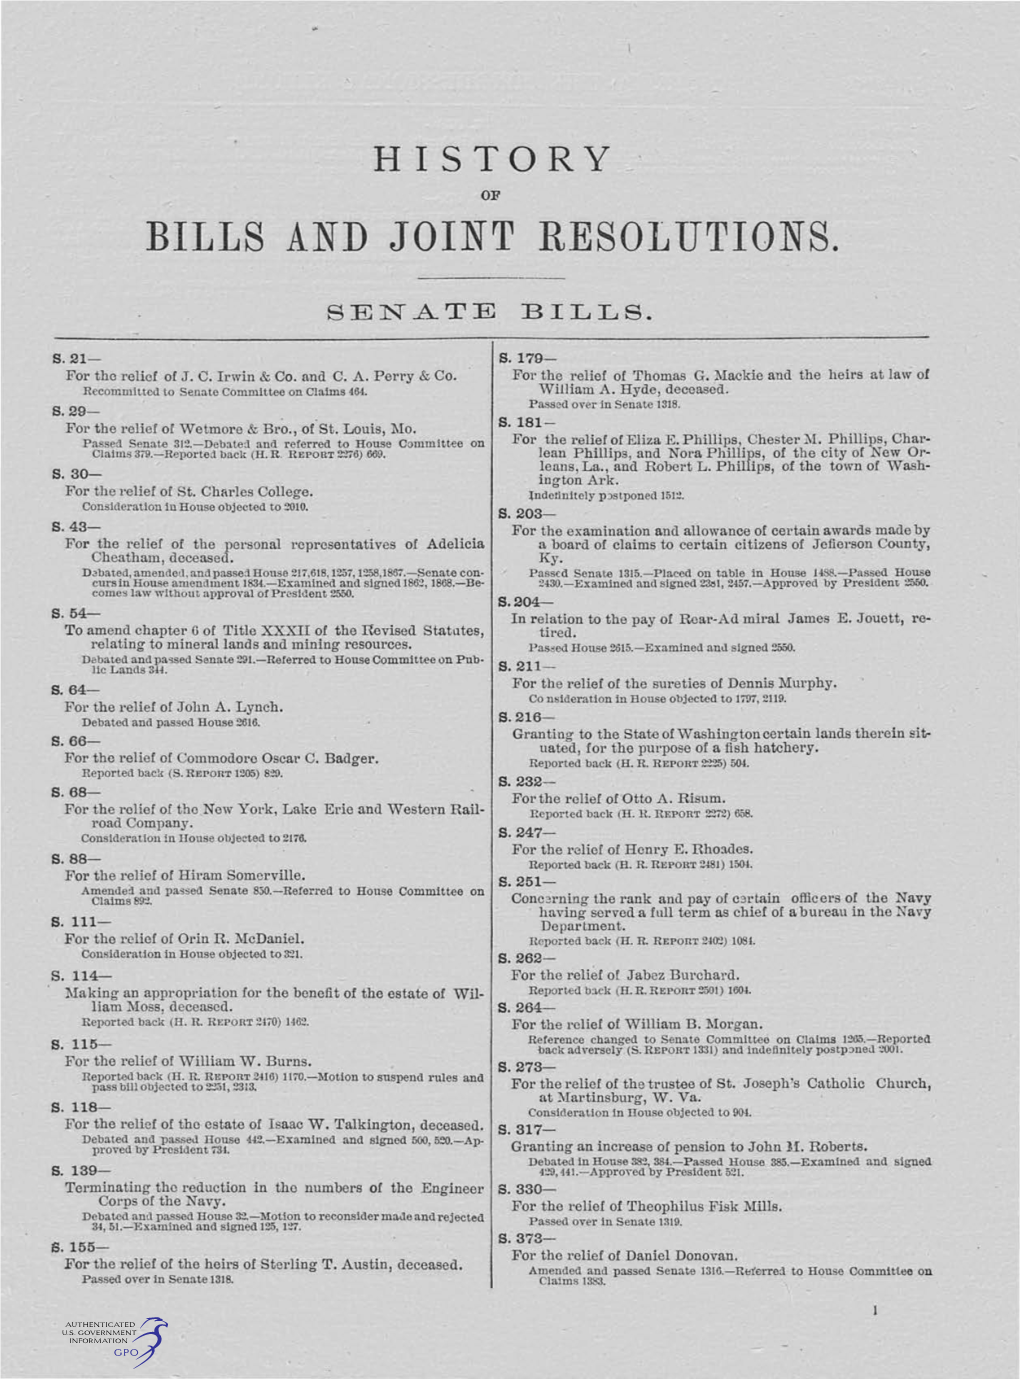 Bills and Joint Resolutions